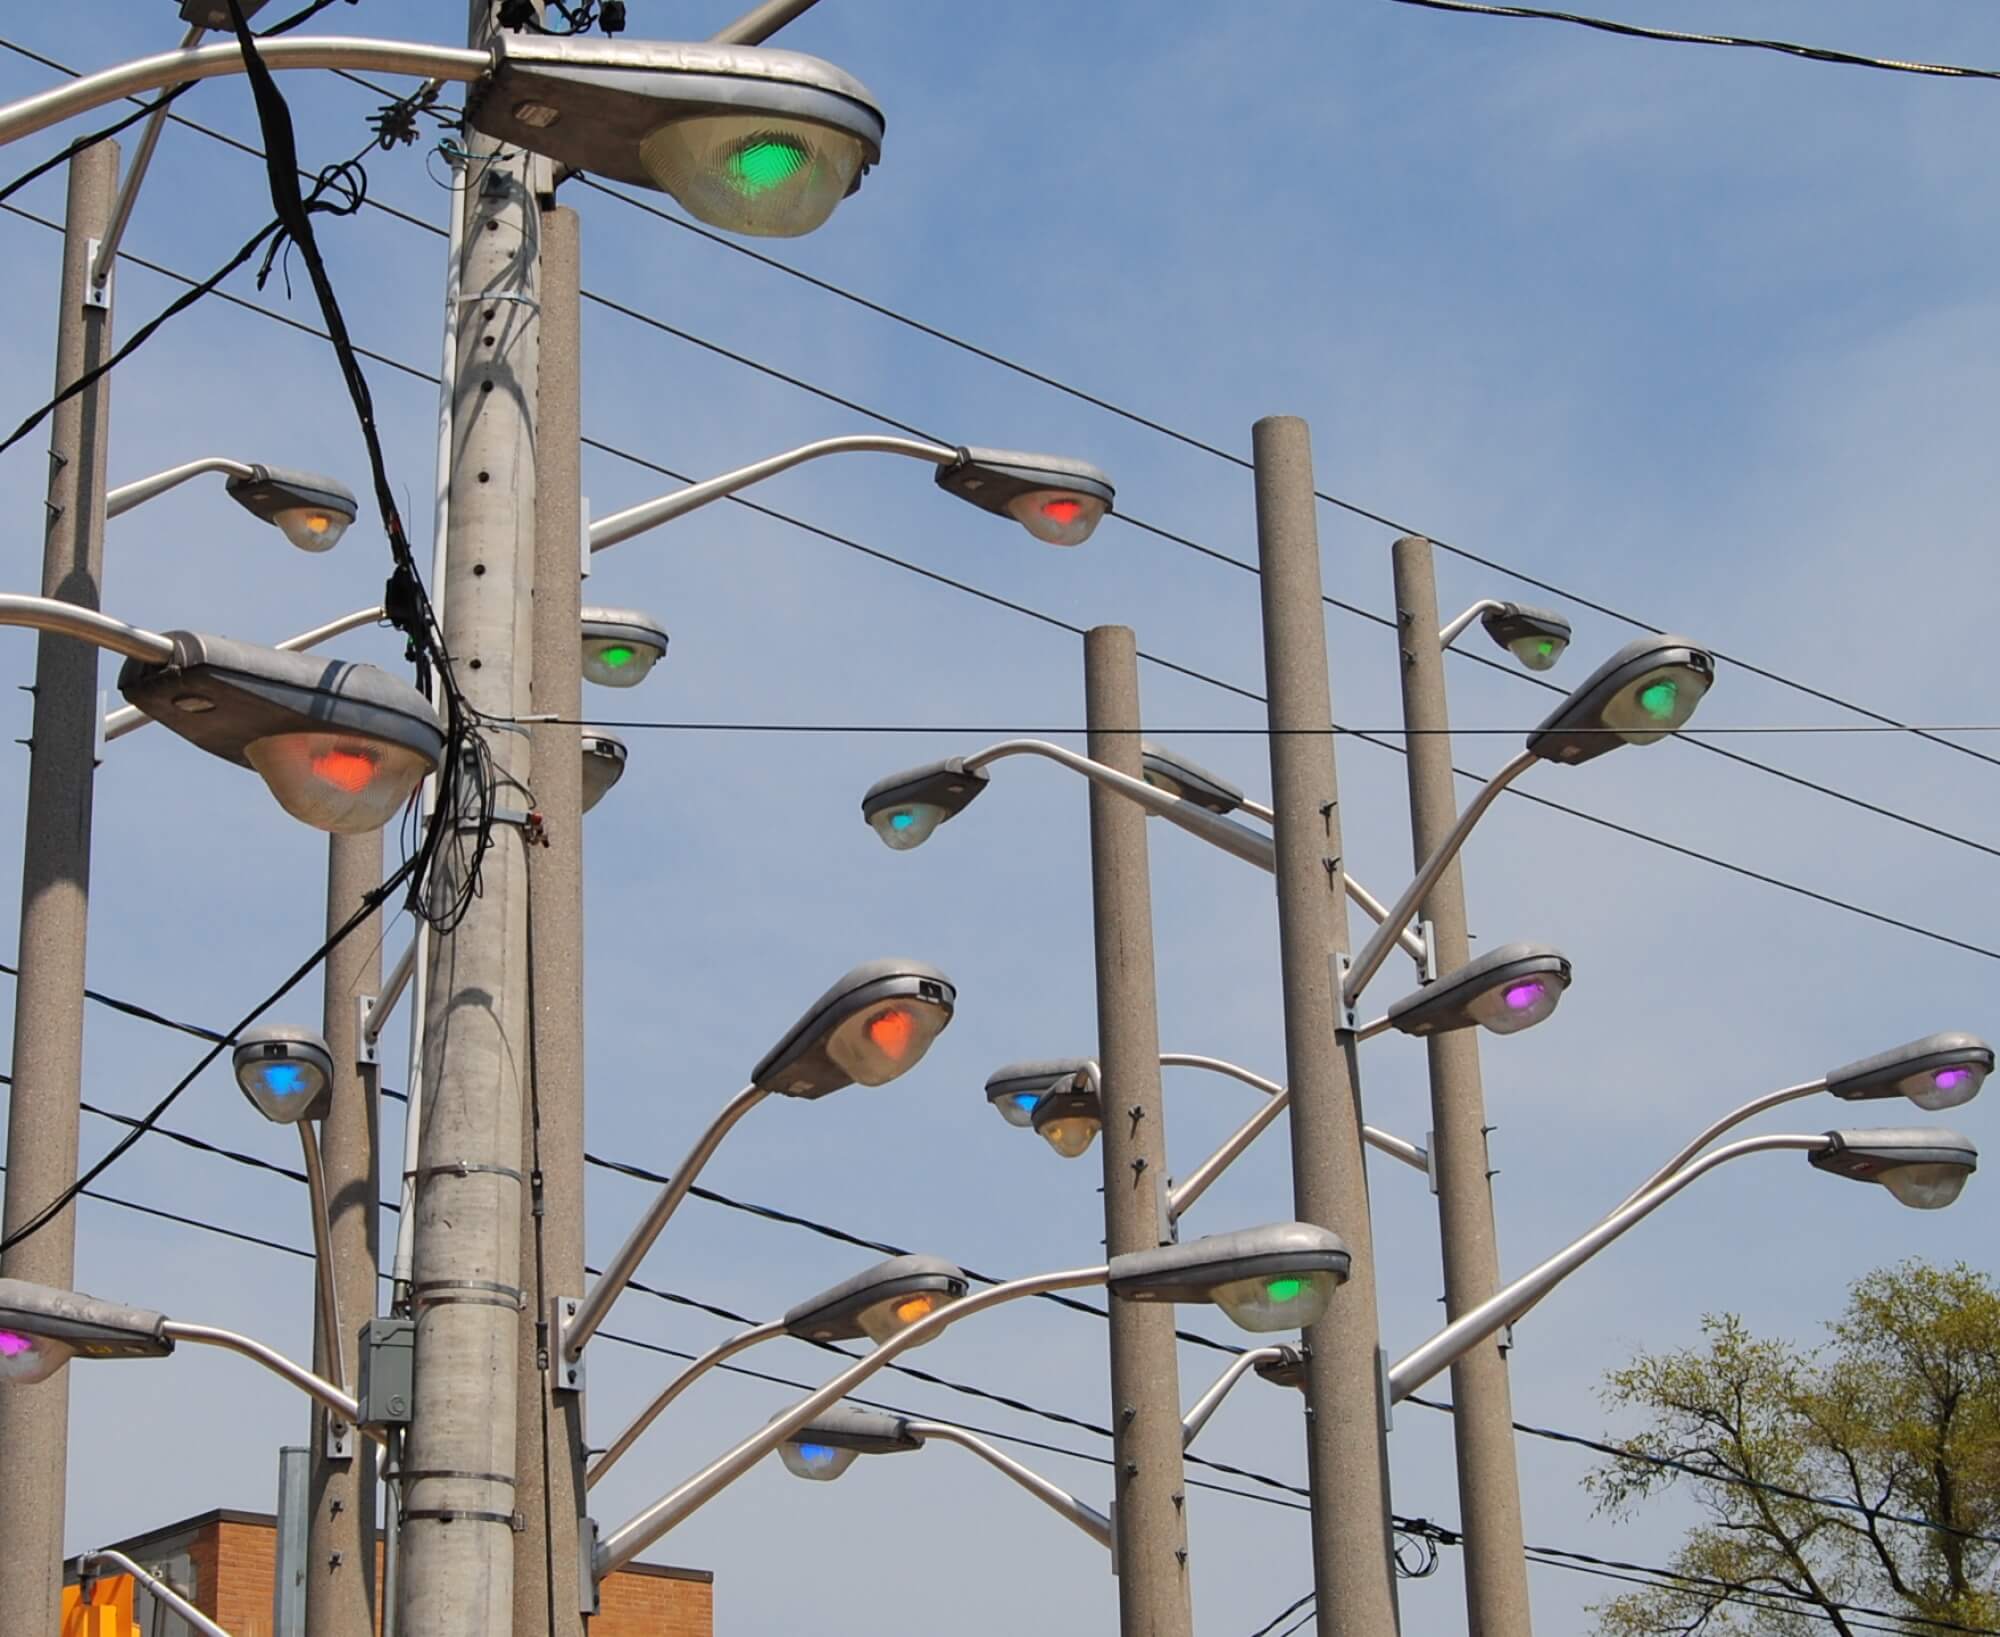 Art installation featuring eight light poles with several streetlights jutting out in different directions. The lights are a variety of colours: green, red, blue, orange, purple. Above are several electrical wires and a blue sky.